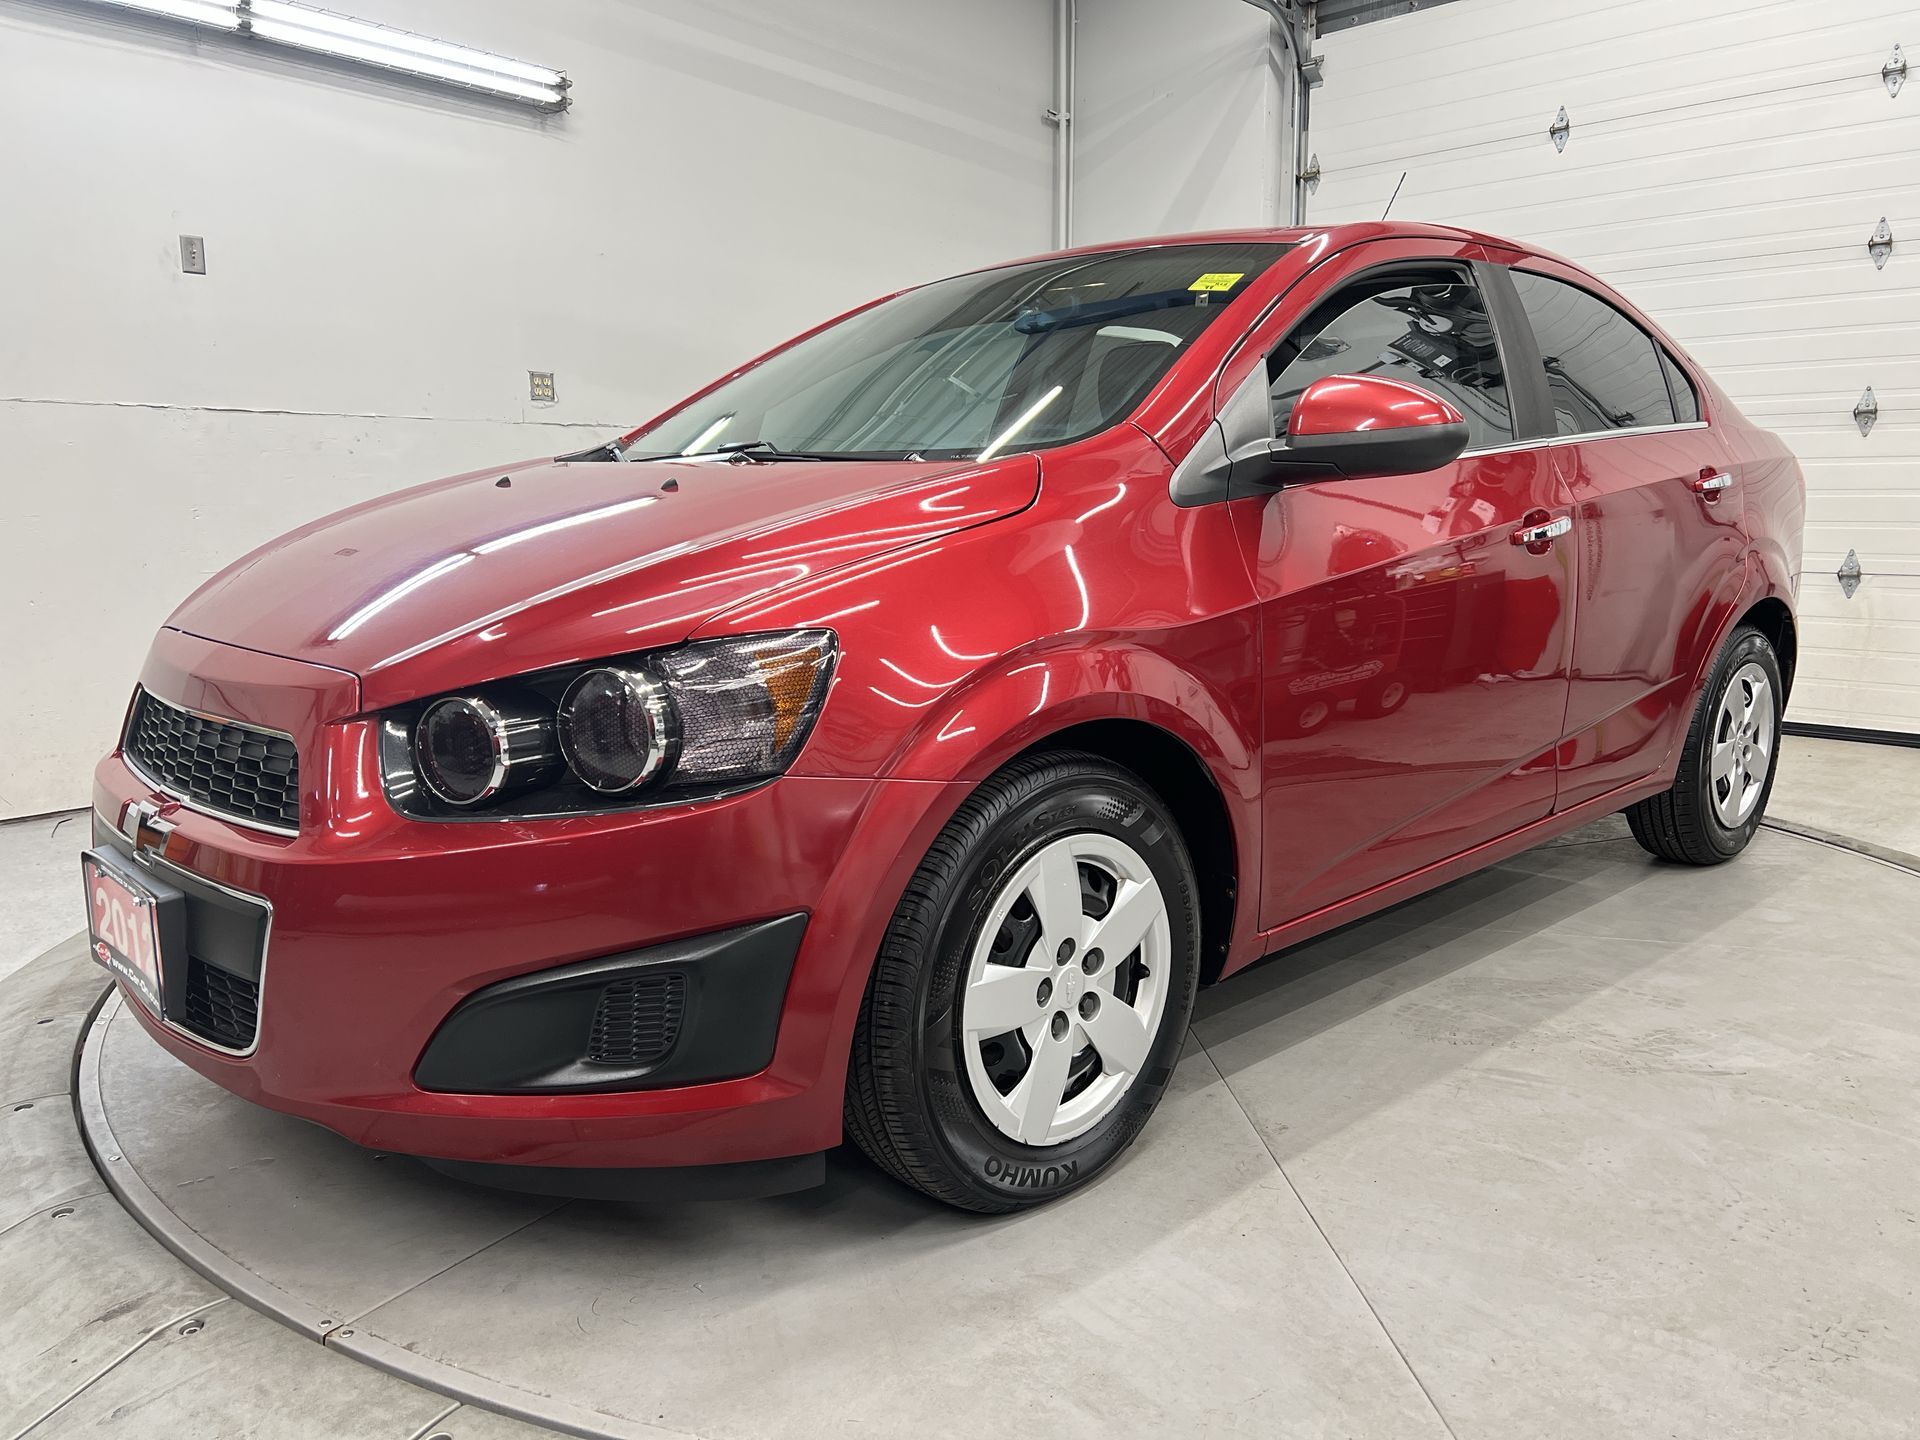 2012 Chevrolet Sonic LT | 5-SPEED | BLUETOOTH | POWER GROUP | A/C